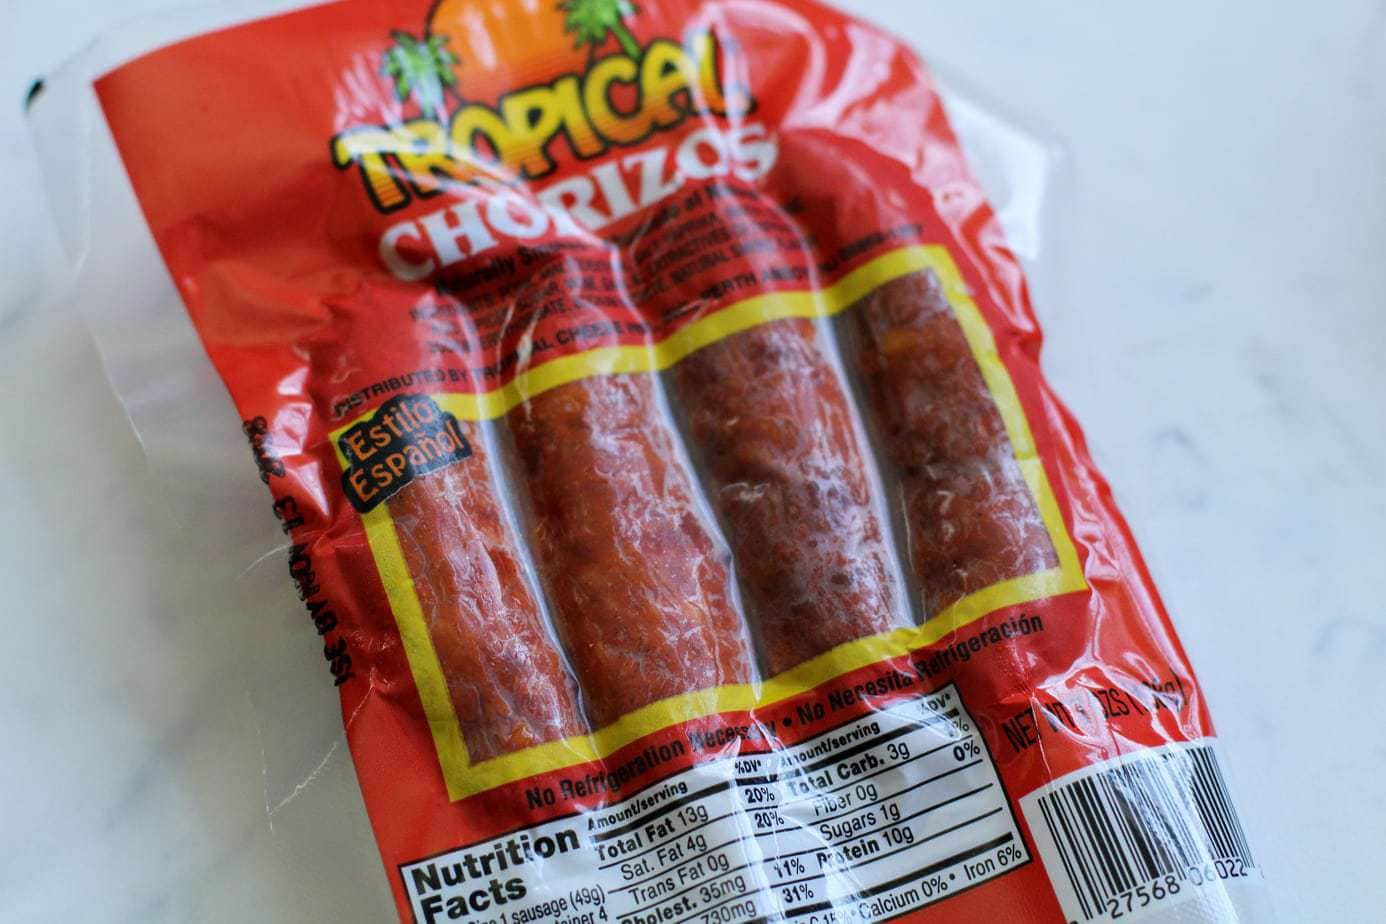 A red package of smoked chorizo from Tropical brand with a gray background.